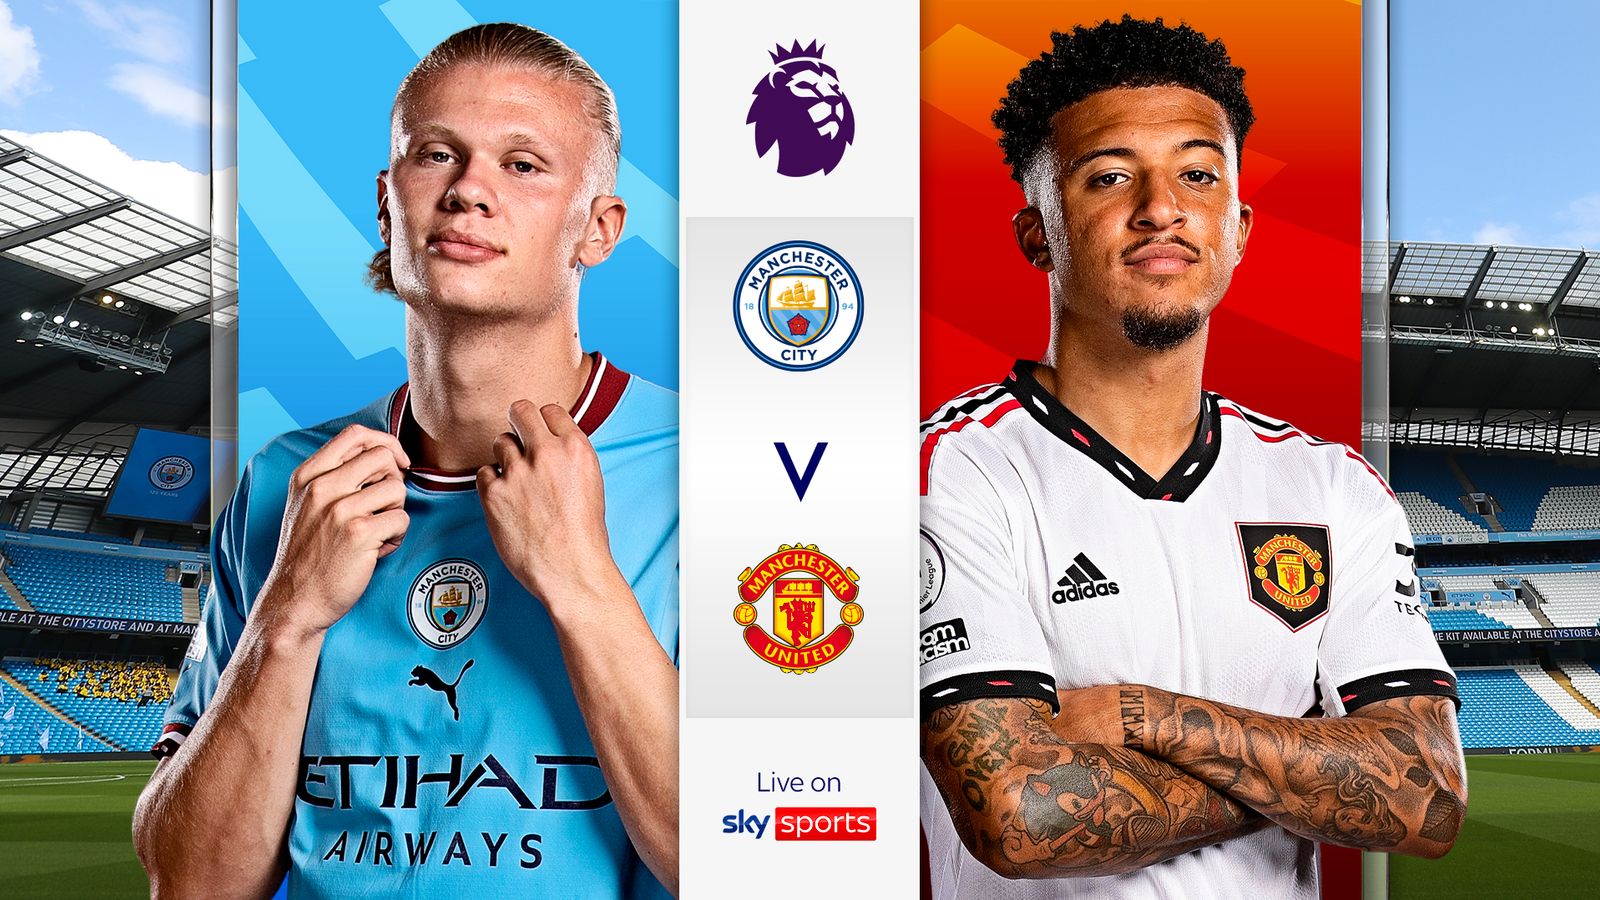 Is Manchester United vs Manchester City on Sky Sports?